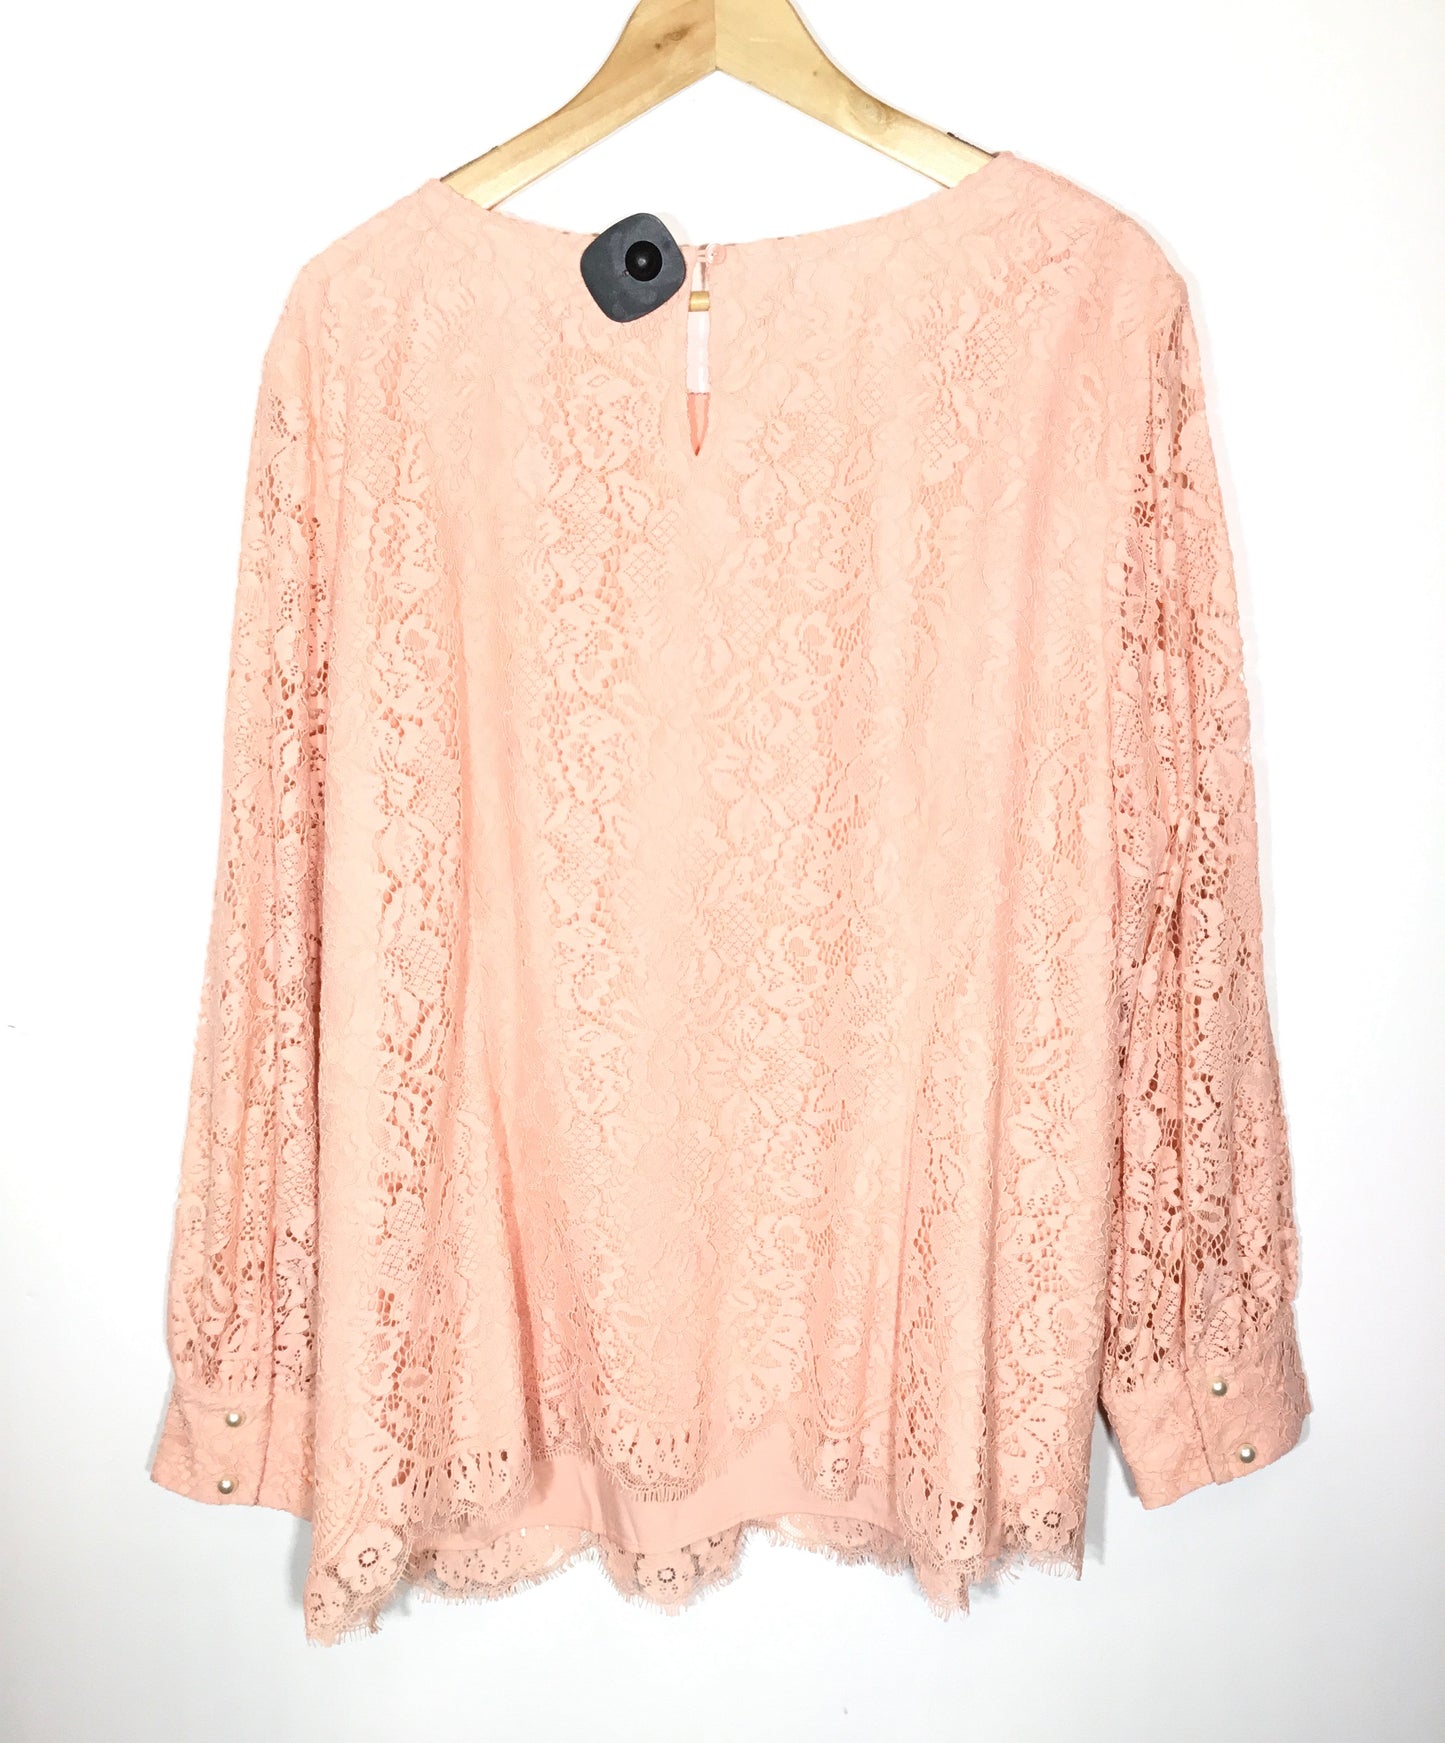 Top Long Sleeve By Talbots  Size: 3x